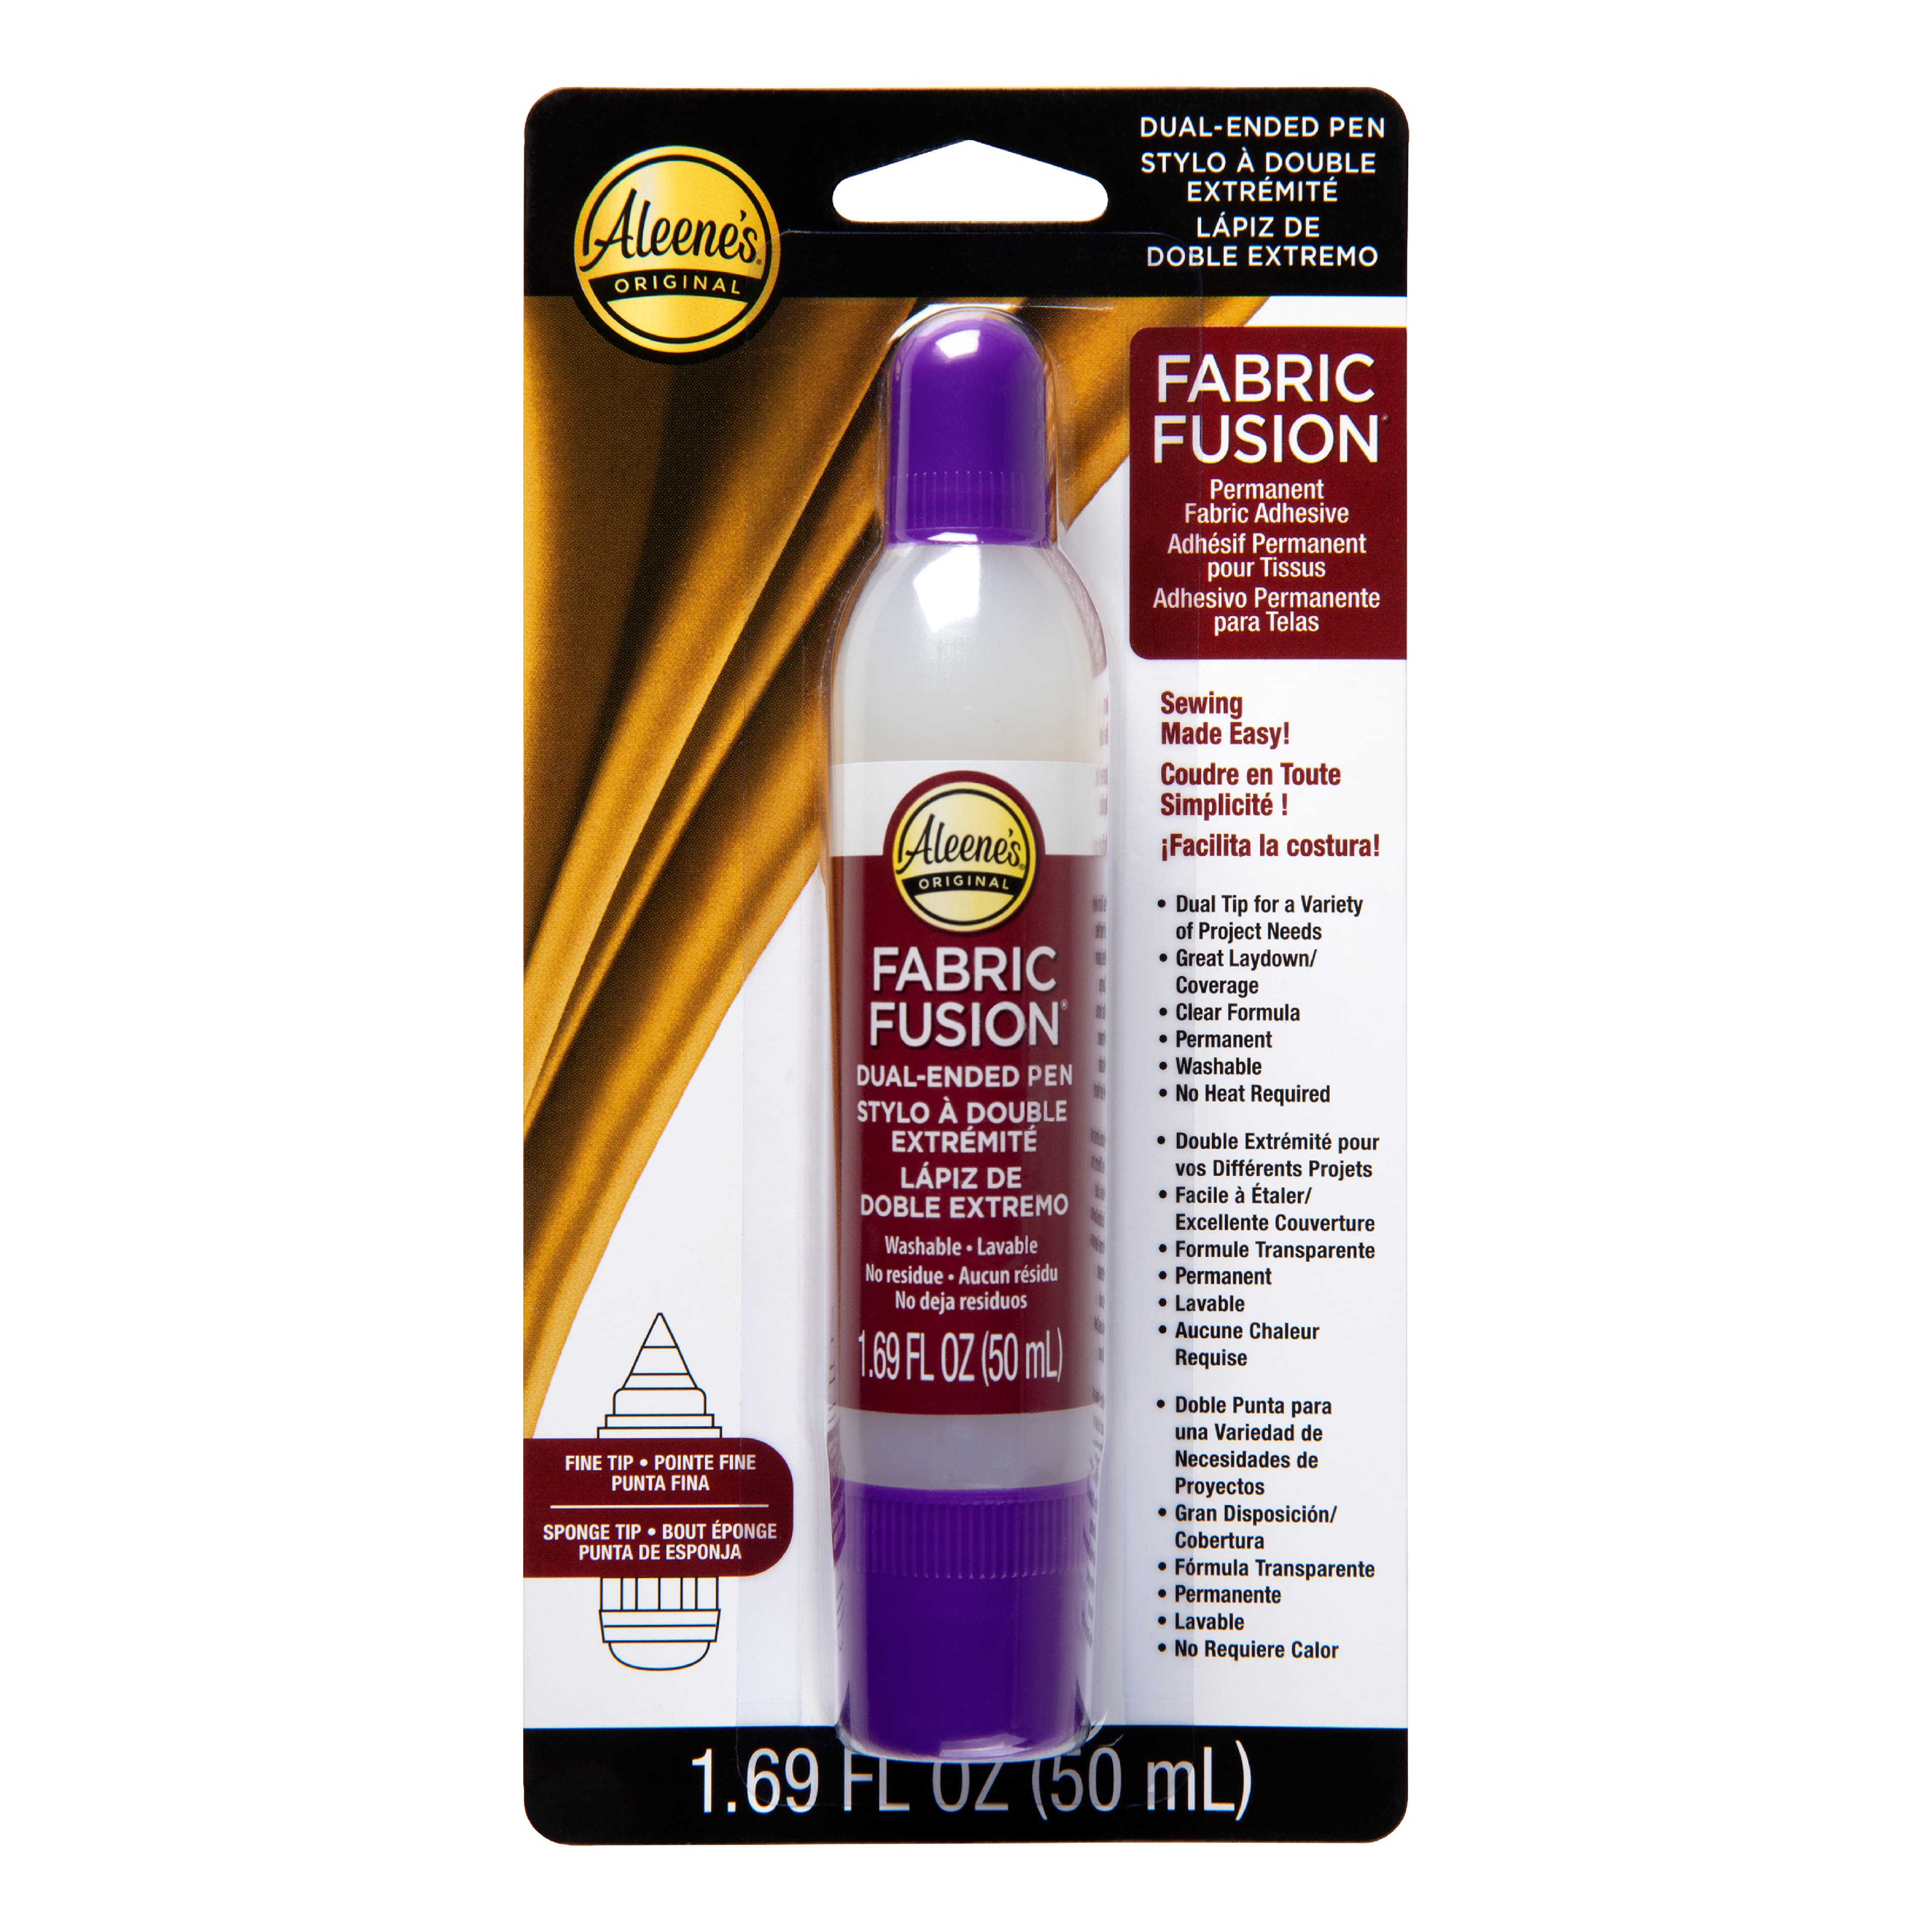 E6000 Fabri-Fuse Fabric Adhesive Glue (4-Ounce) for Rhinestones Gems 5-Pack Pixiss Wooden Handle Stylus Applicator Pens